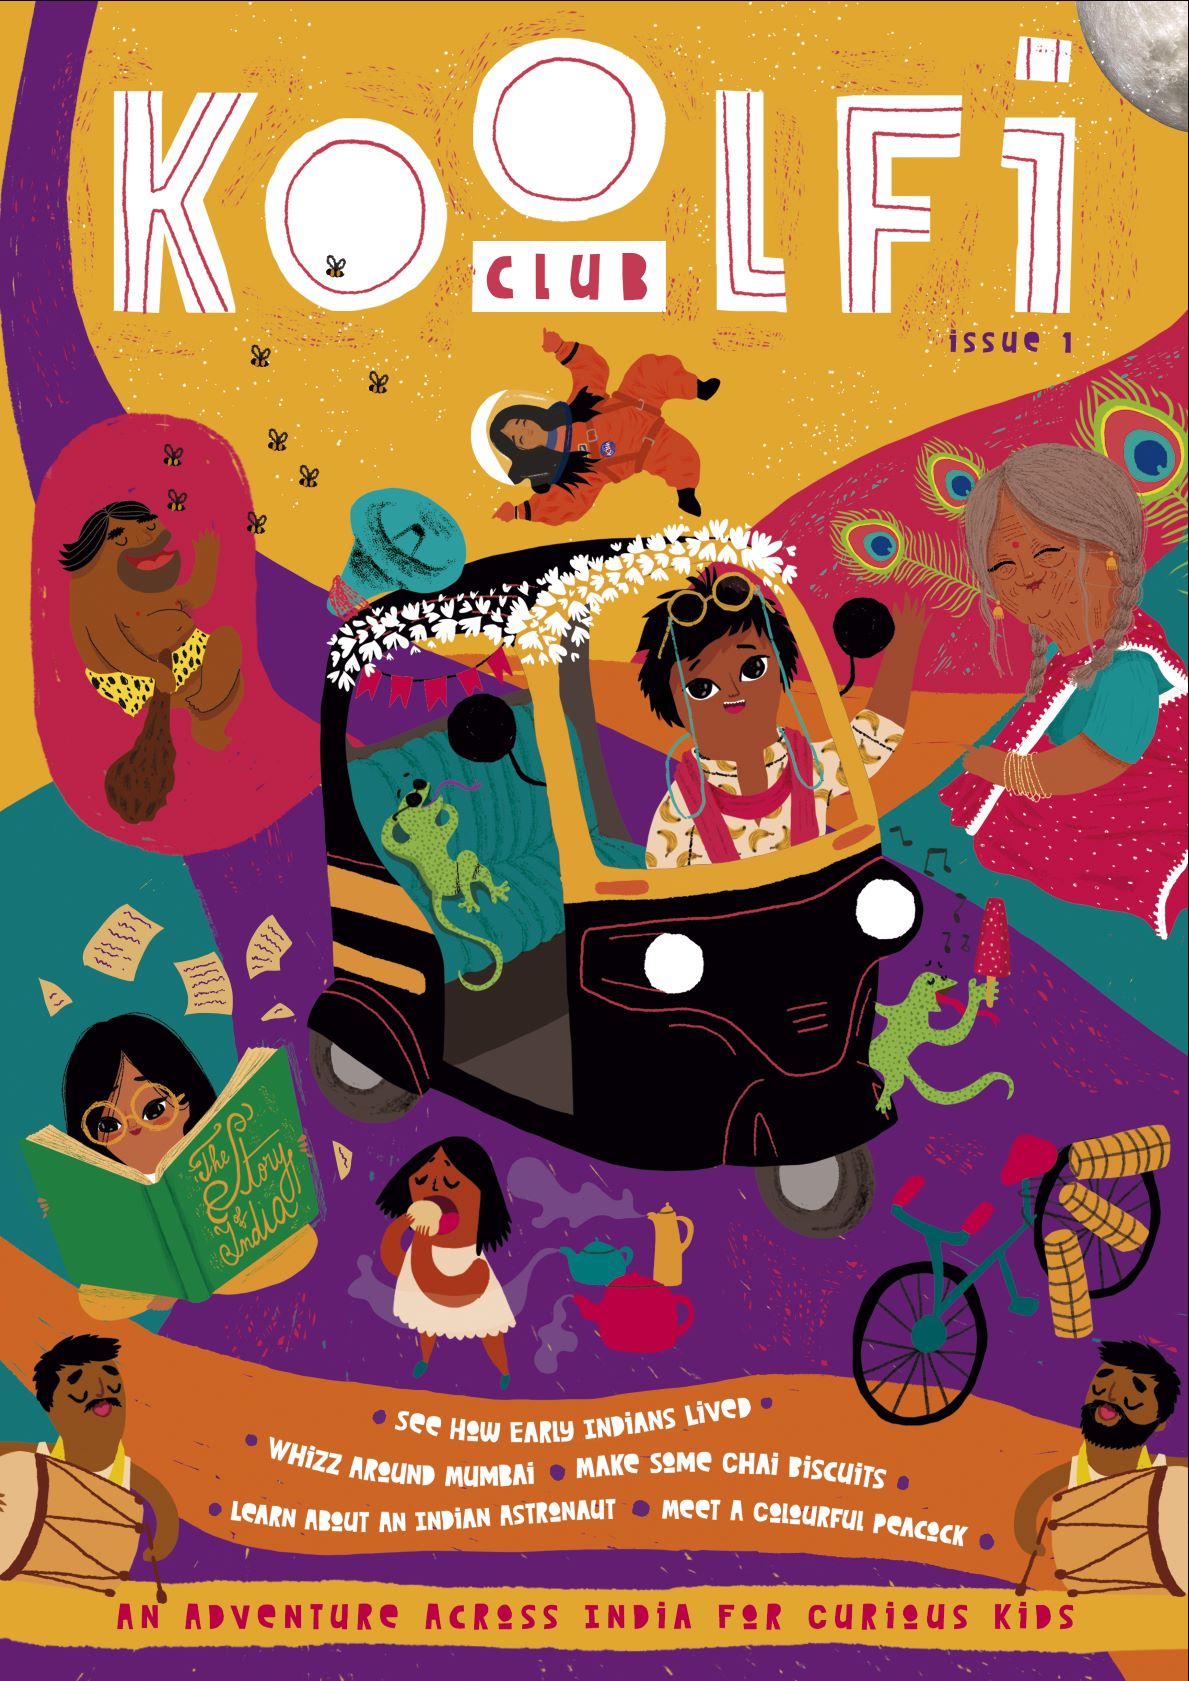 The cover of 'Koolfi Club' magazine, with vibrant illustrations of Indian culture and history.